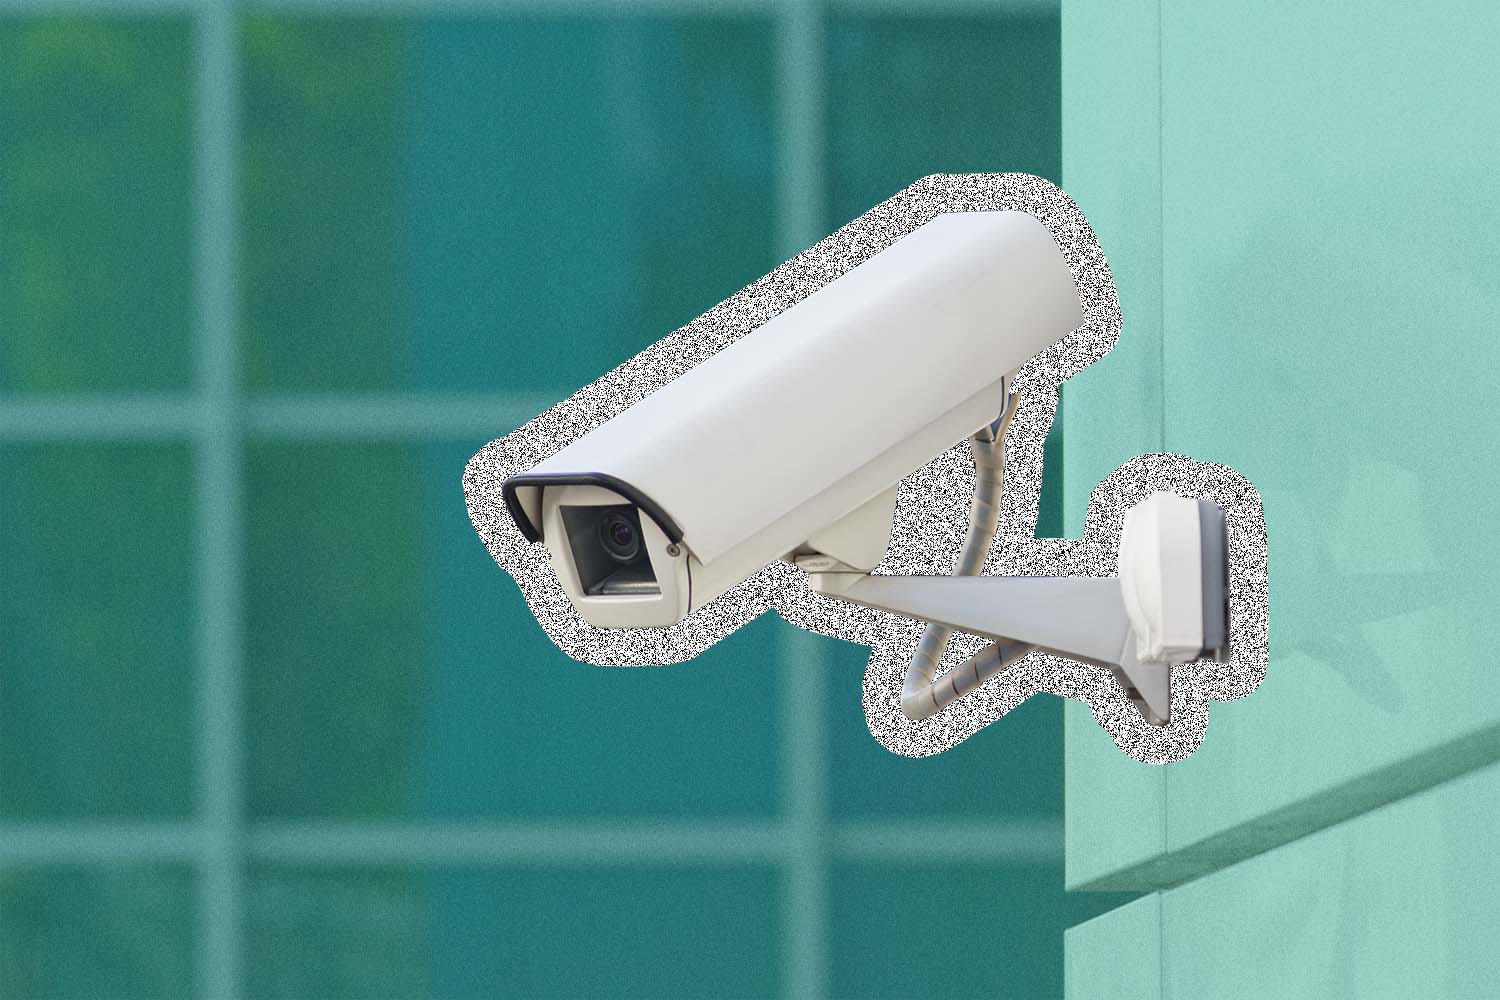 Security camera attached to a building